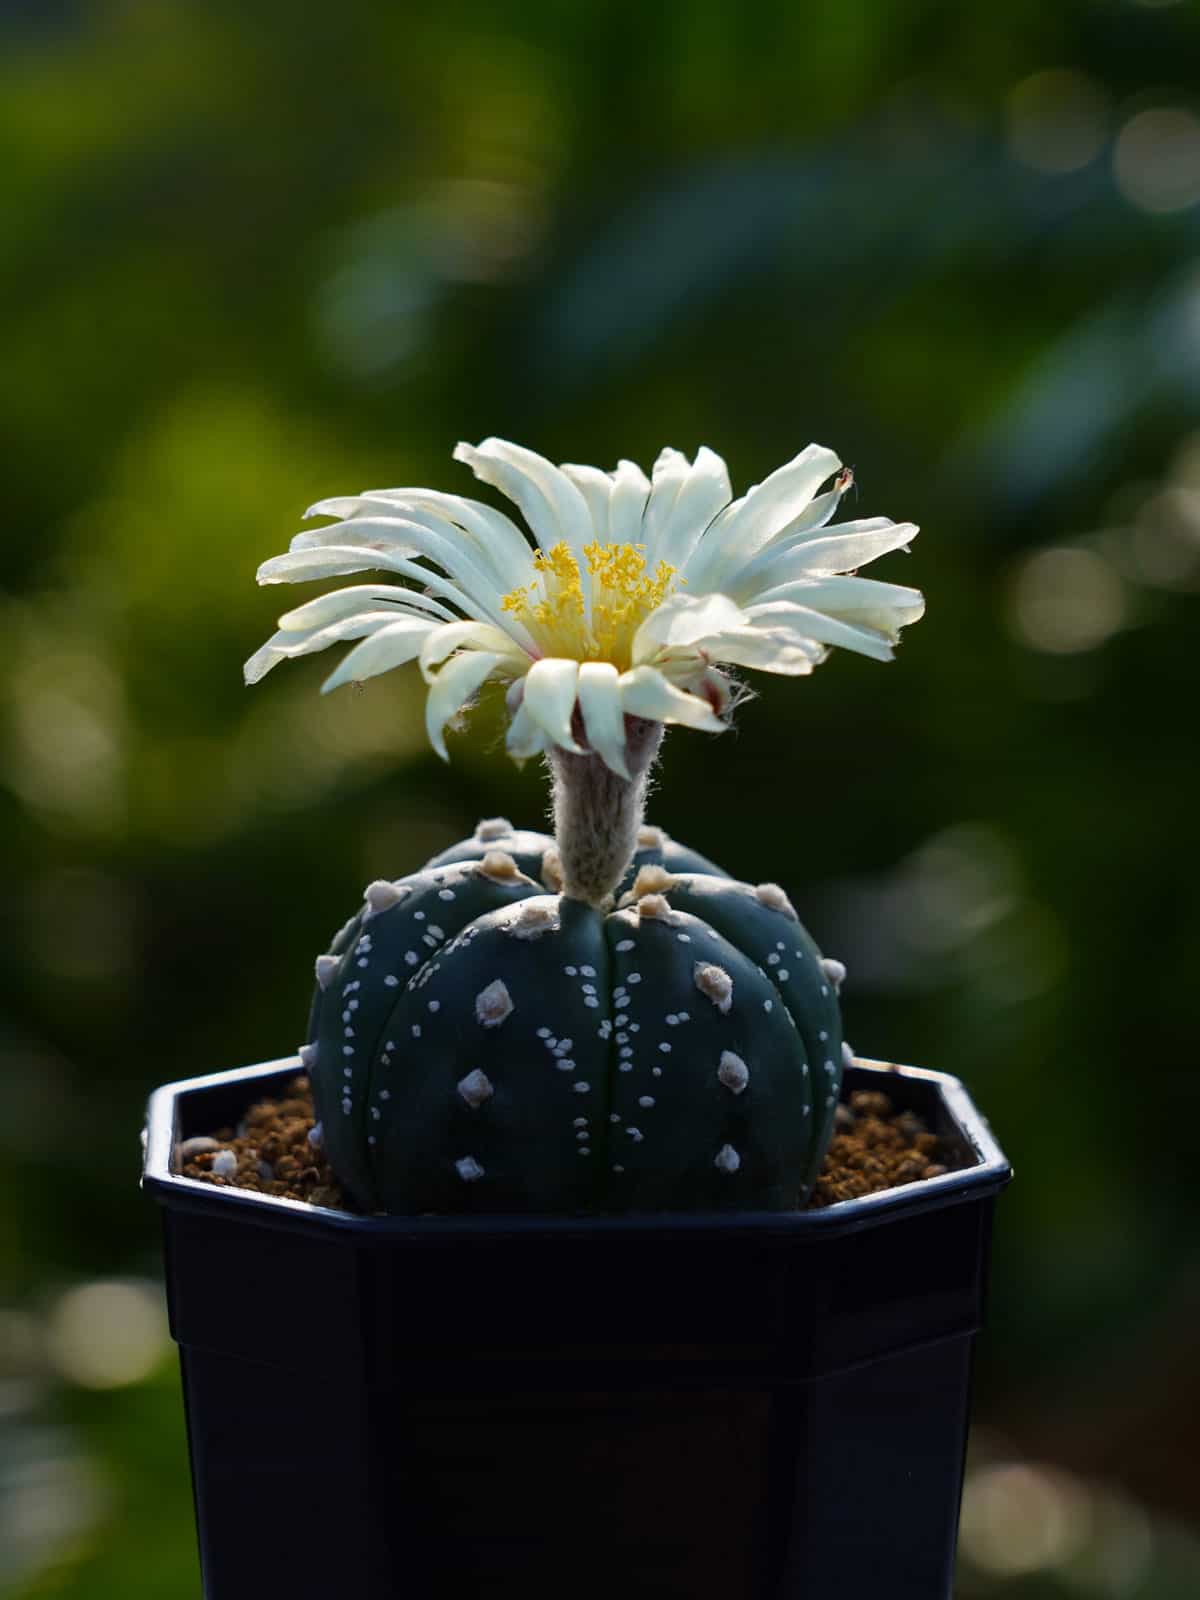 Astrophytum cactus or Star Cactus blooming brightly in the garden